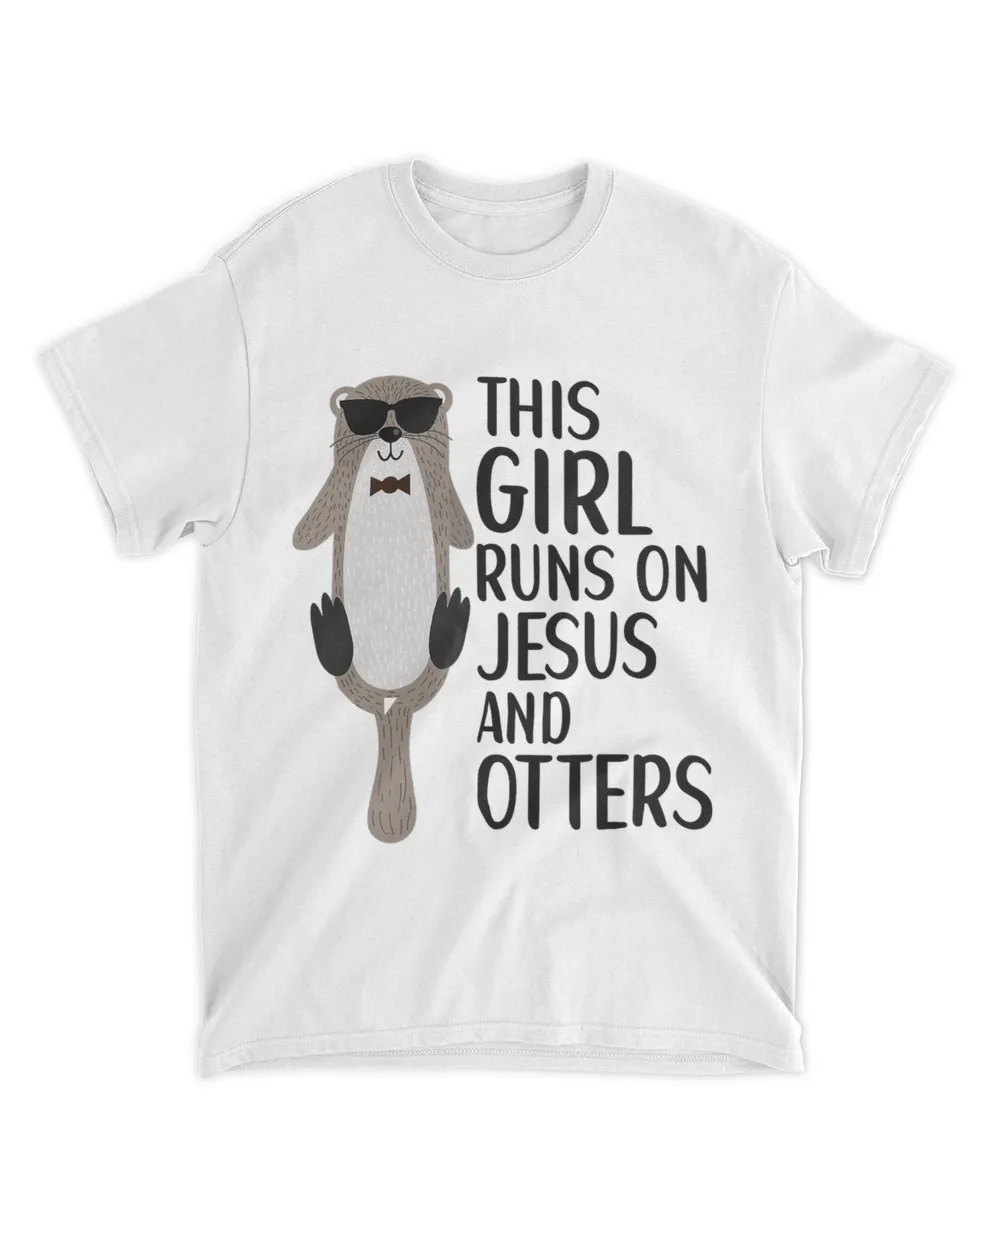 This Girl Runs On Jesus And Otters Sea Otter Cute Apparel